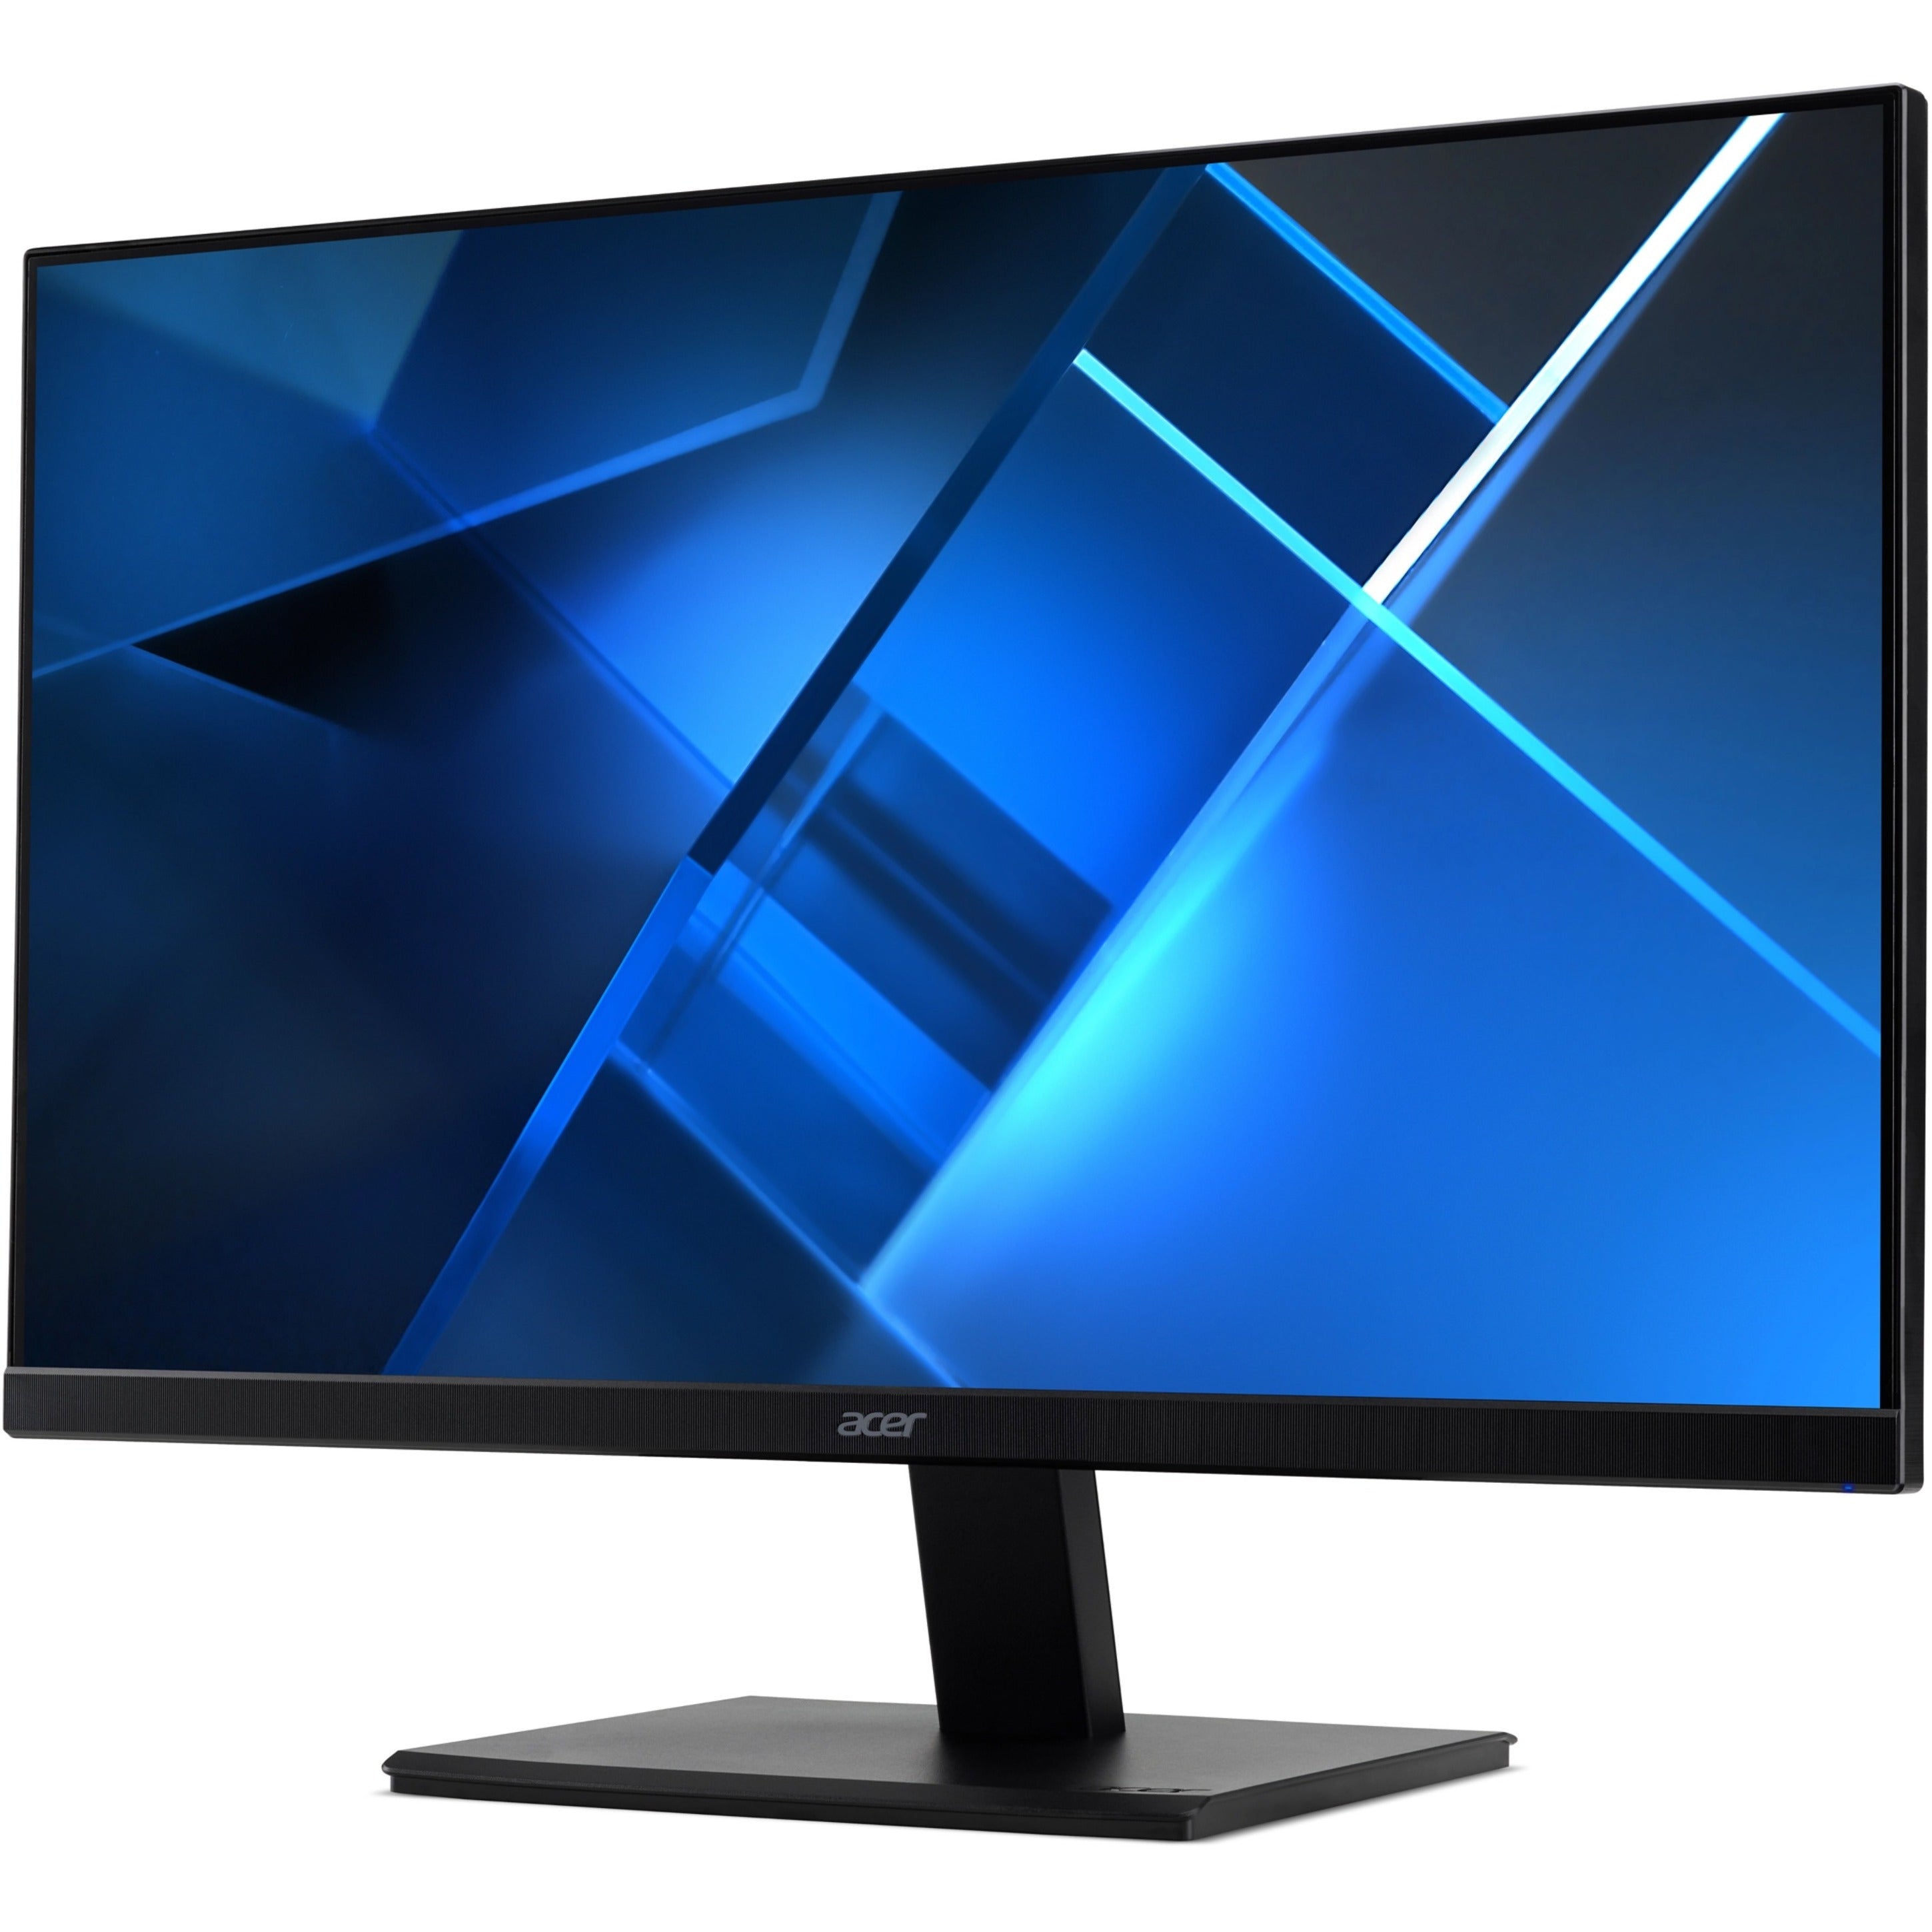 Acer UM.QV7AA.H02 V247Y H Widescreen LCD Monitor, 23.8, 4ms GTG, 250 Nit, FreeSync